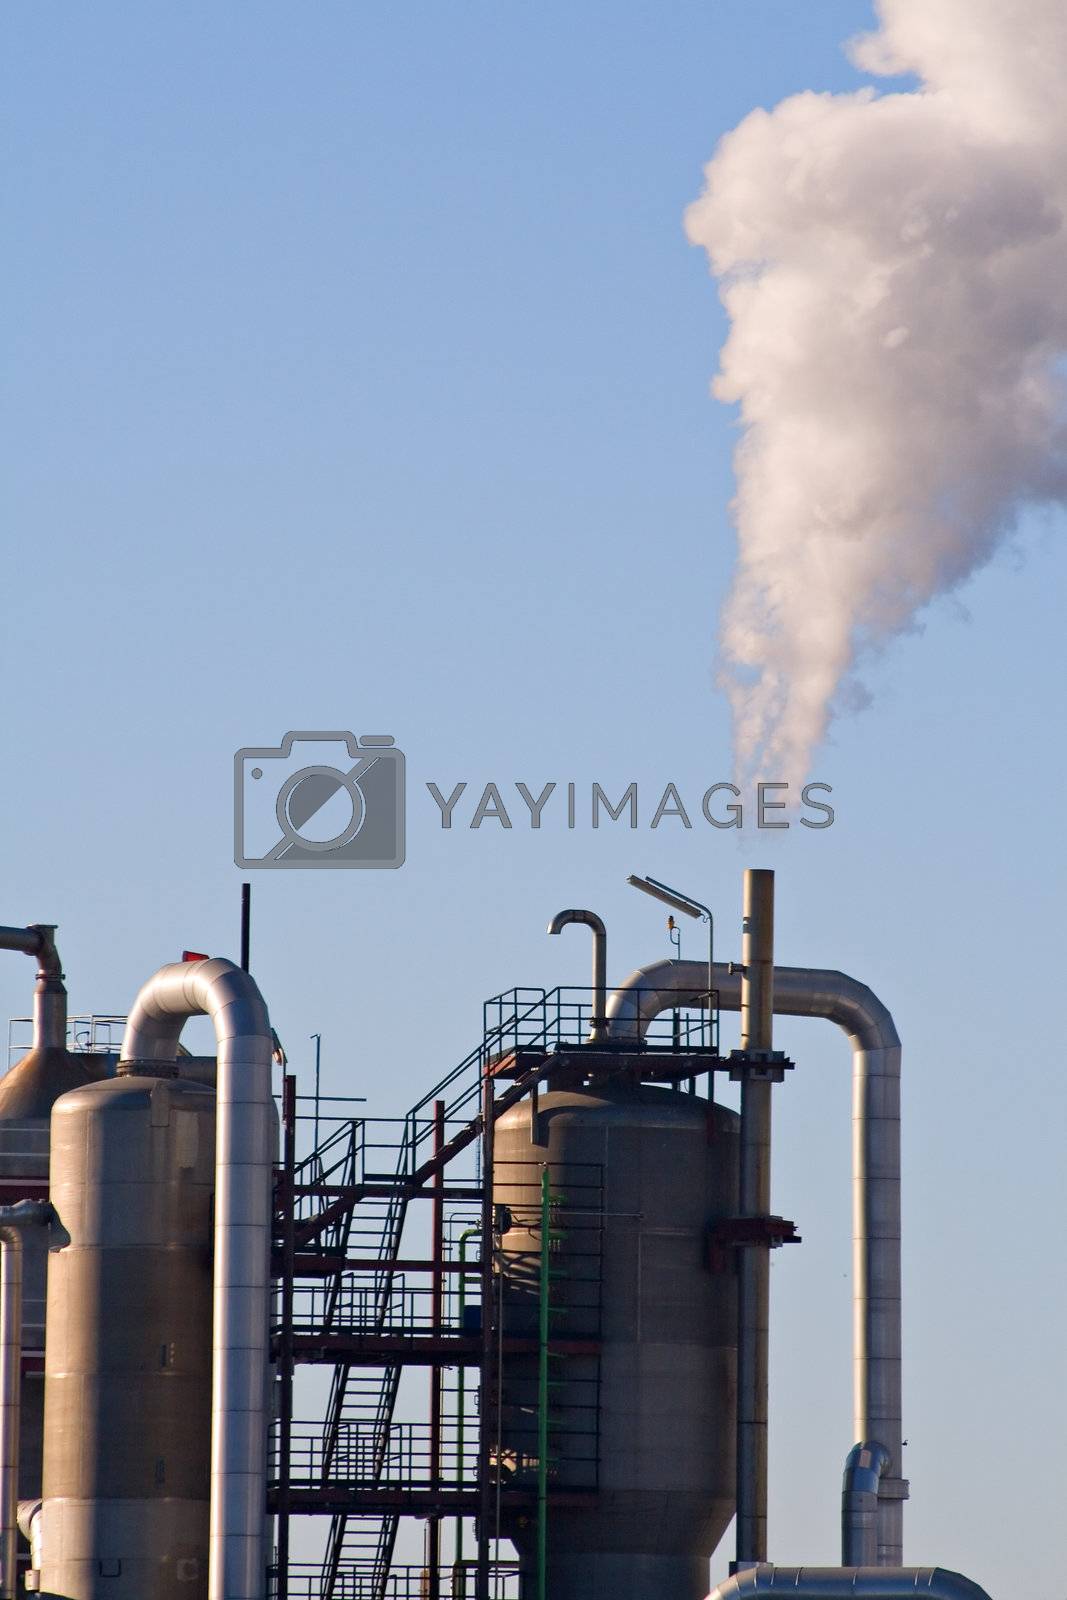 Royalty free image of Industrial plant  by PauloResende